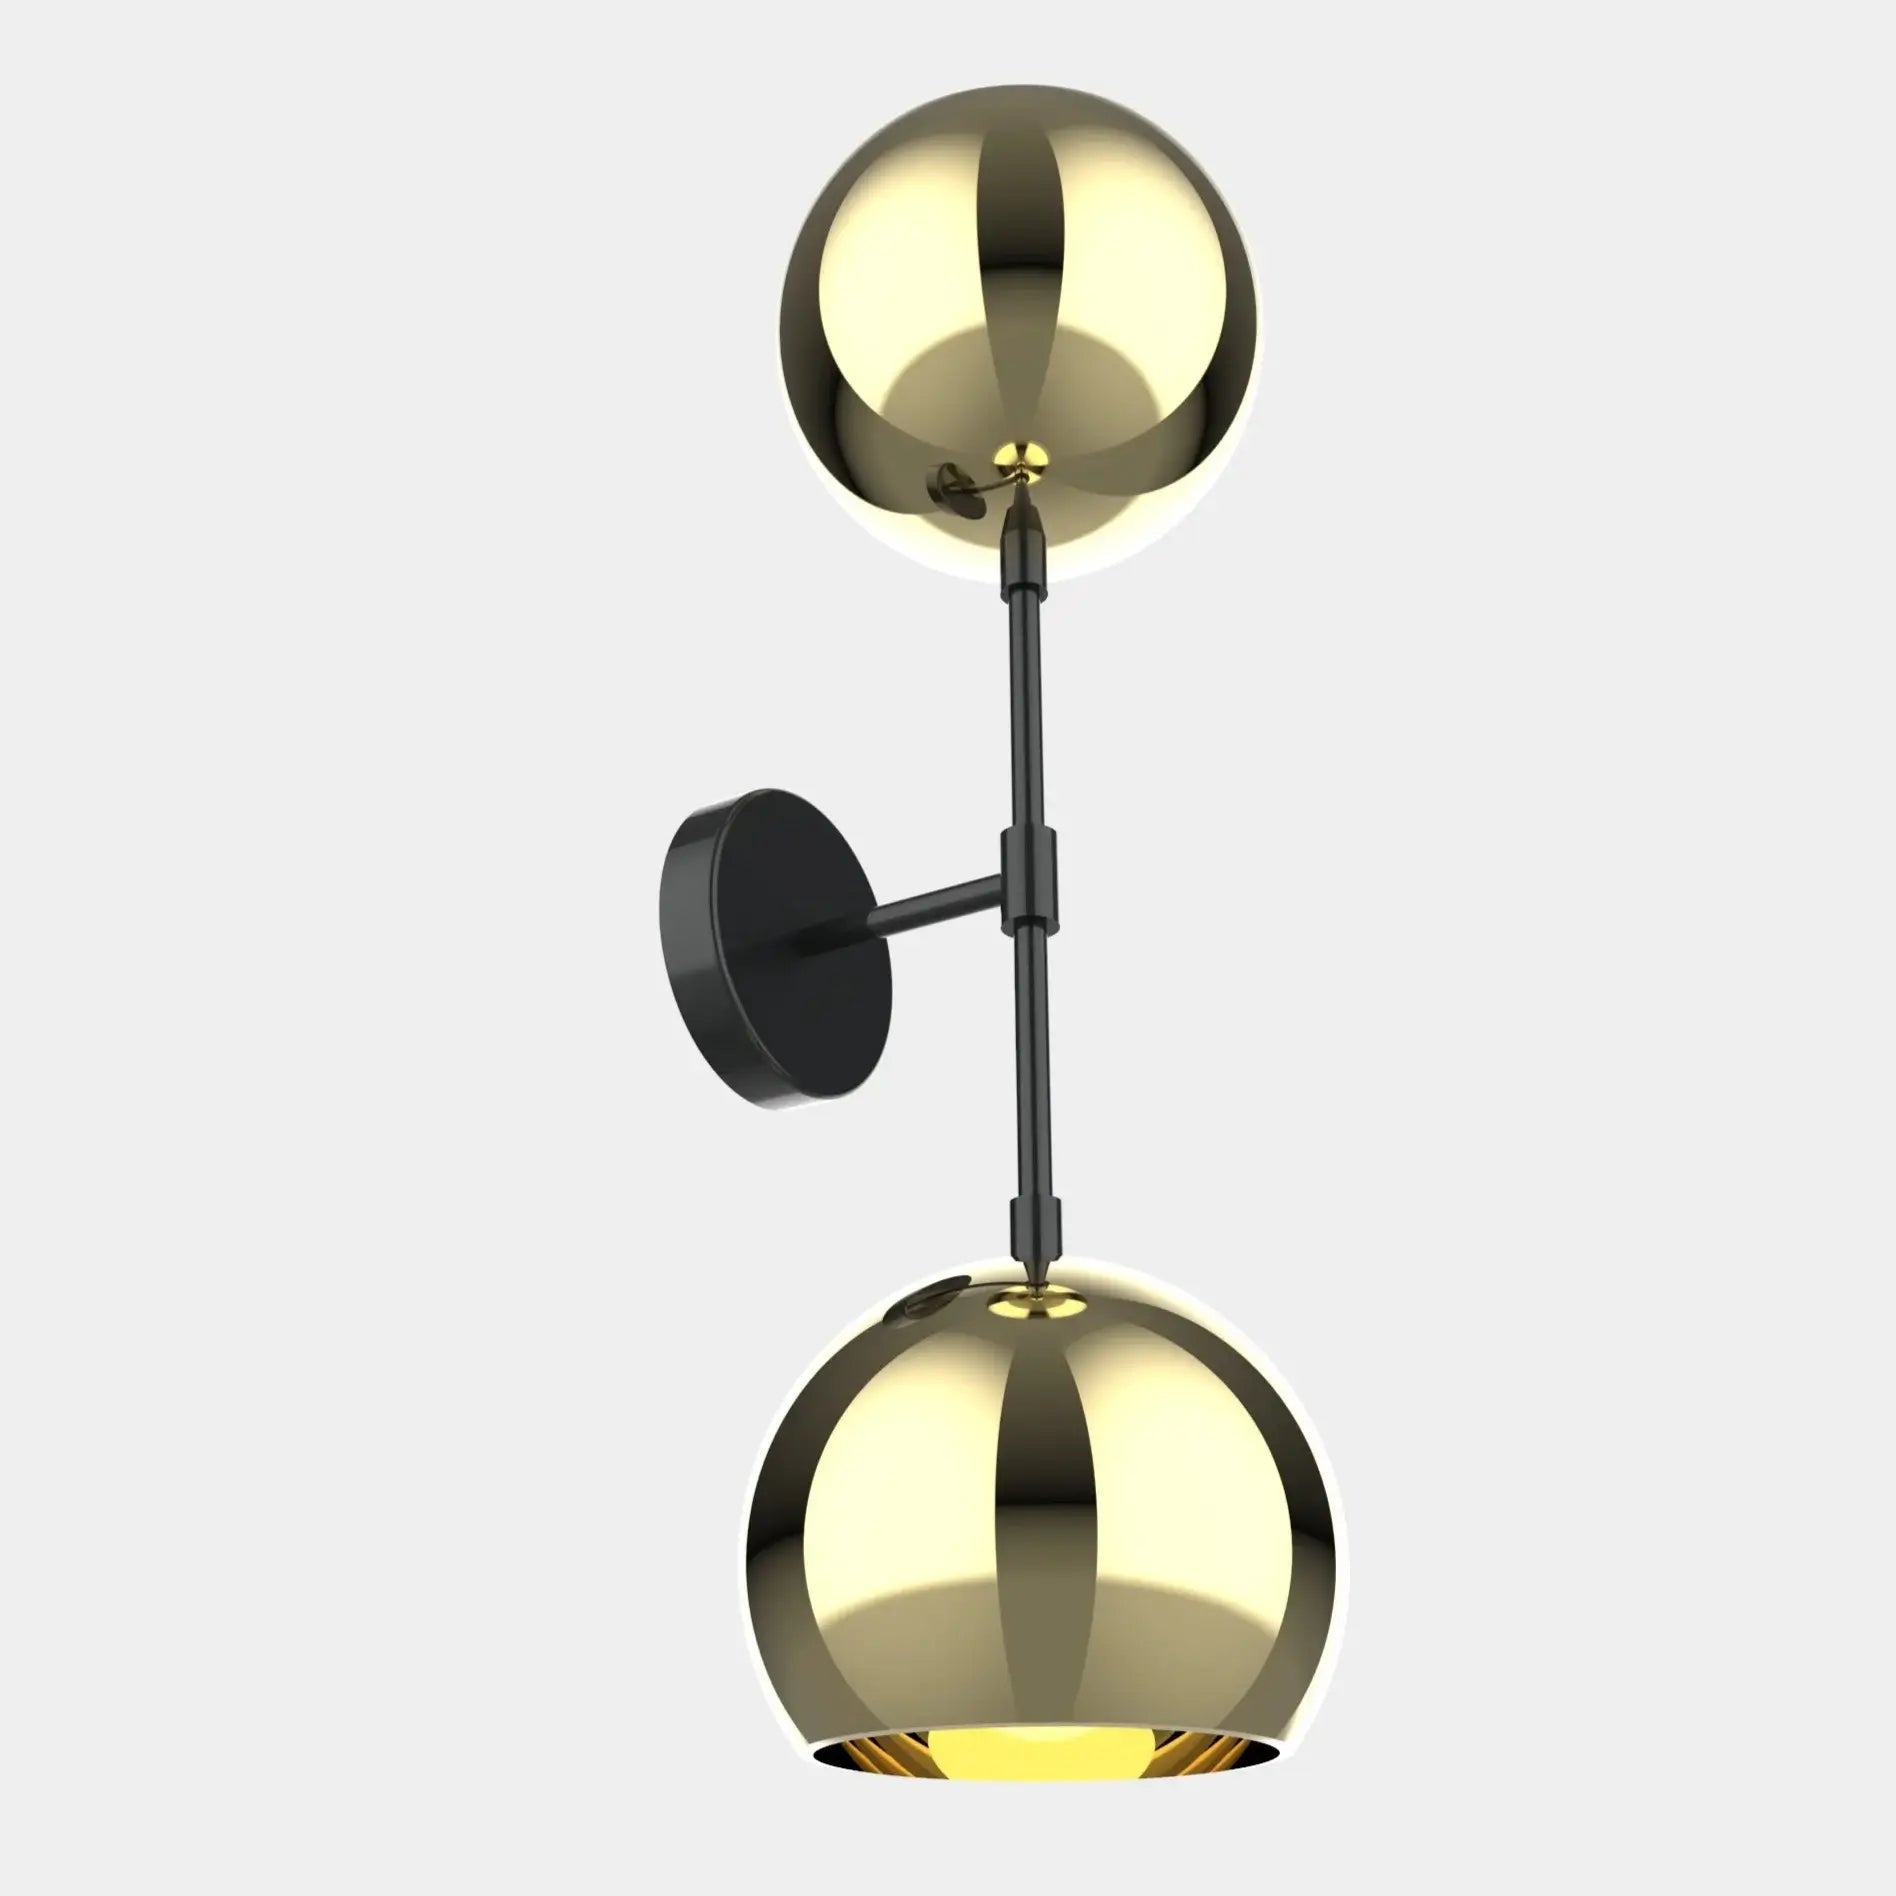 Dounia home Wall scone in Polished brass  made of Metal, Model: Mishal